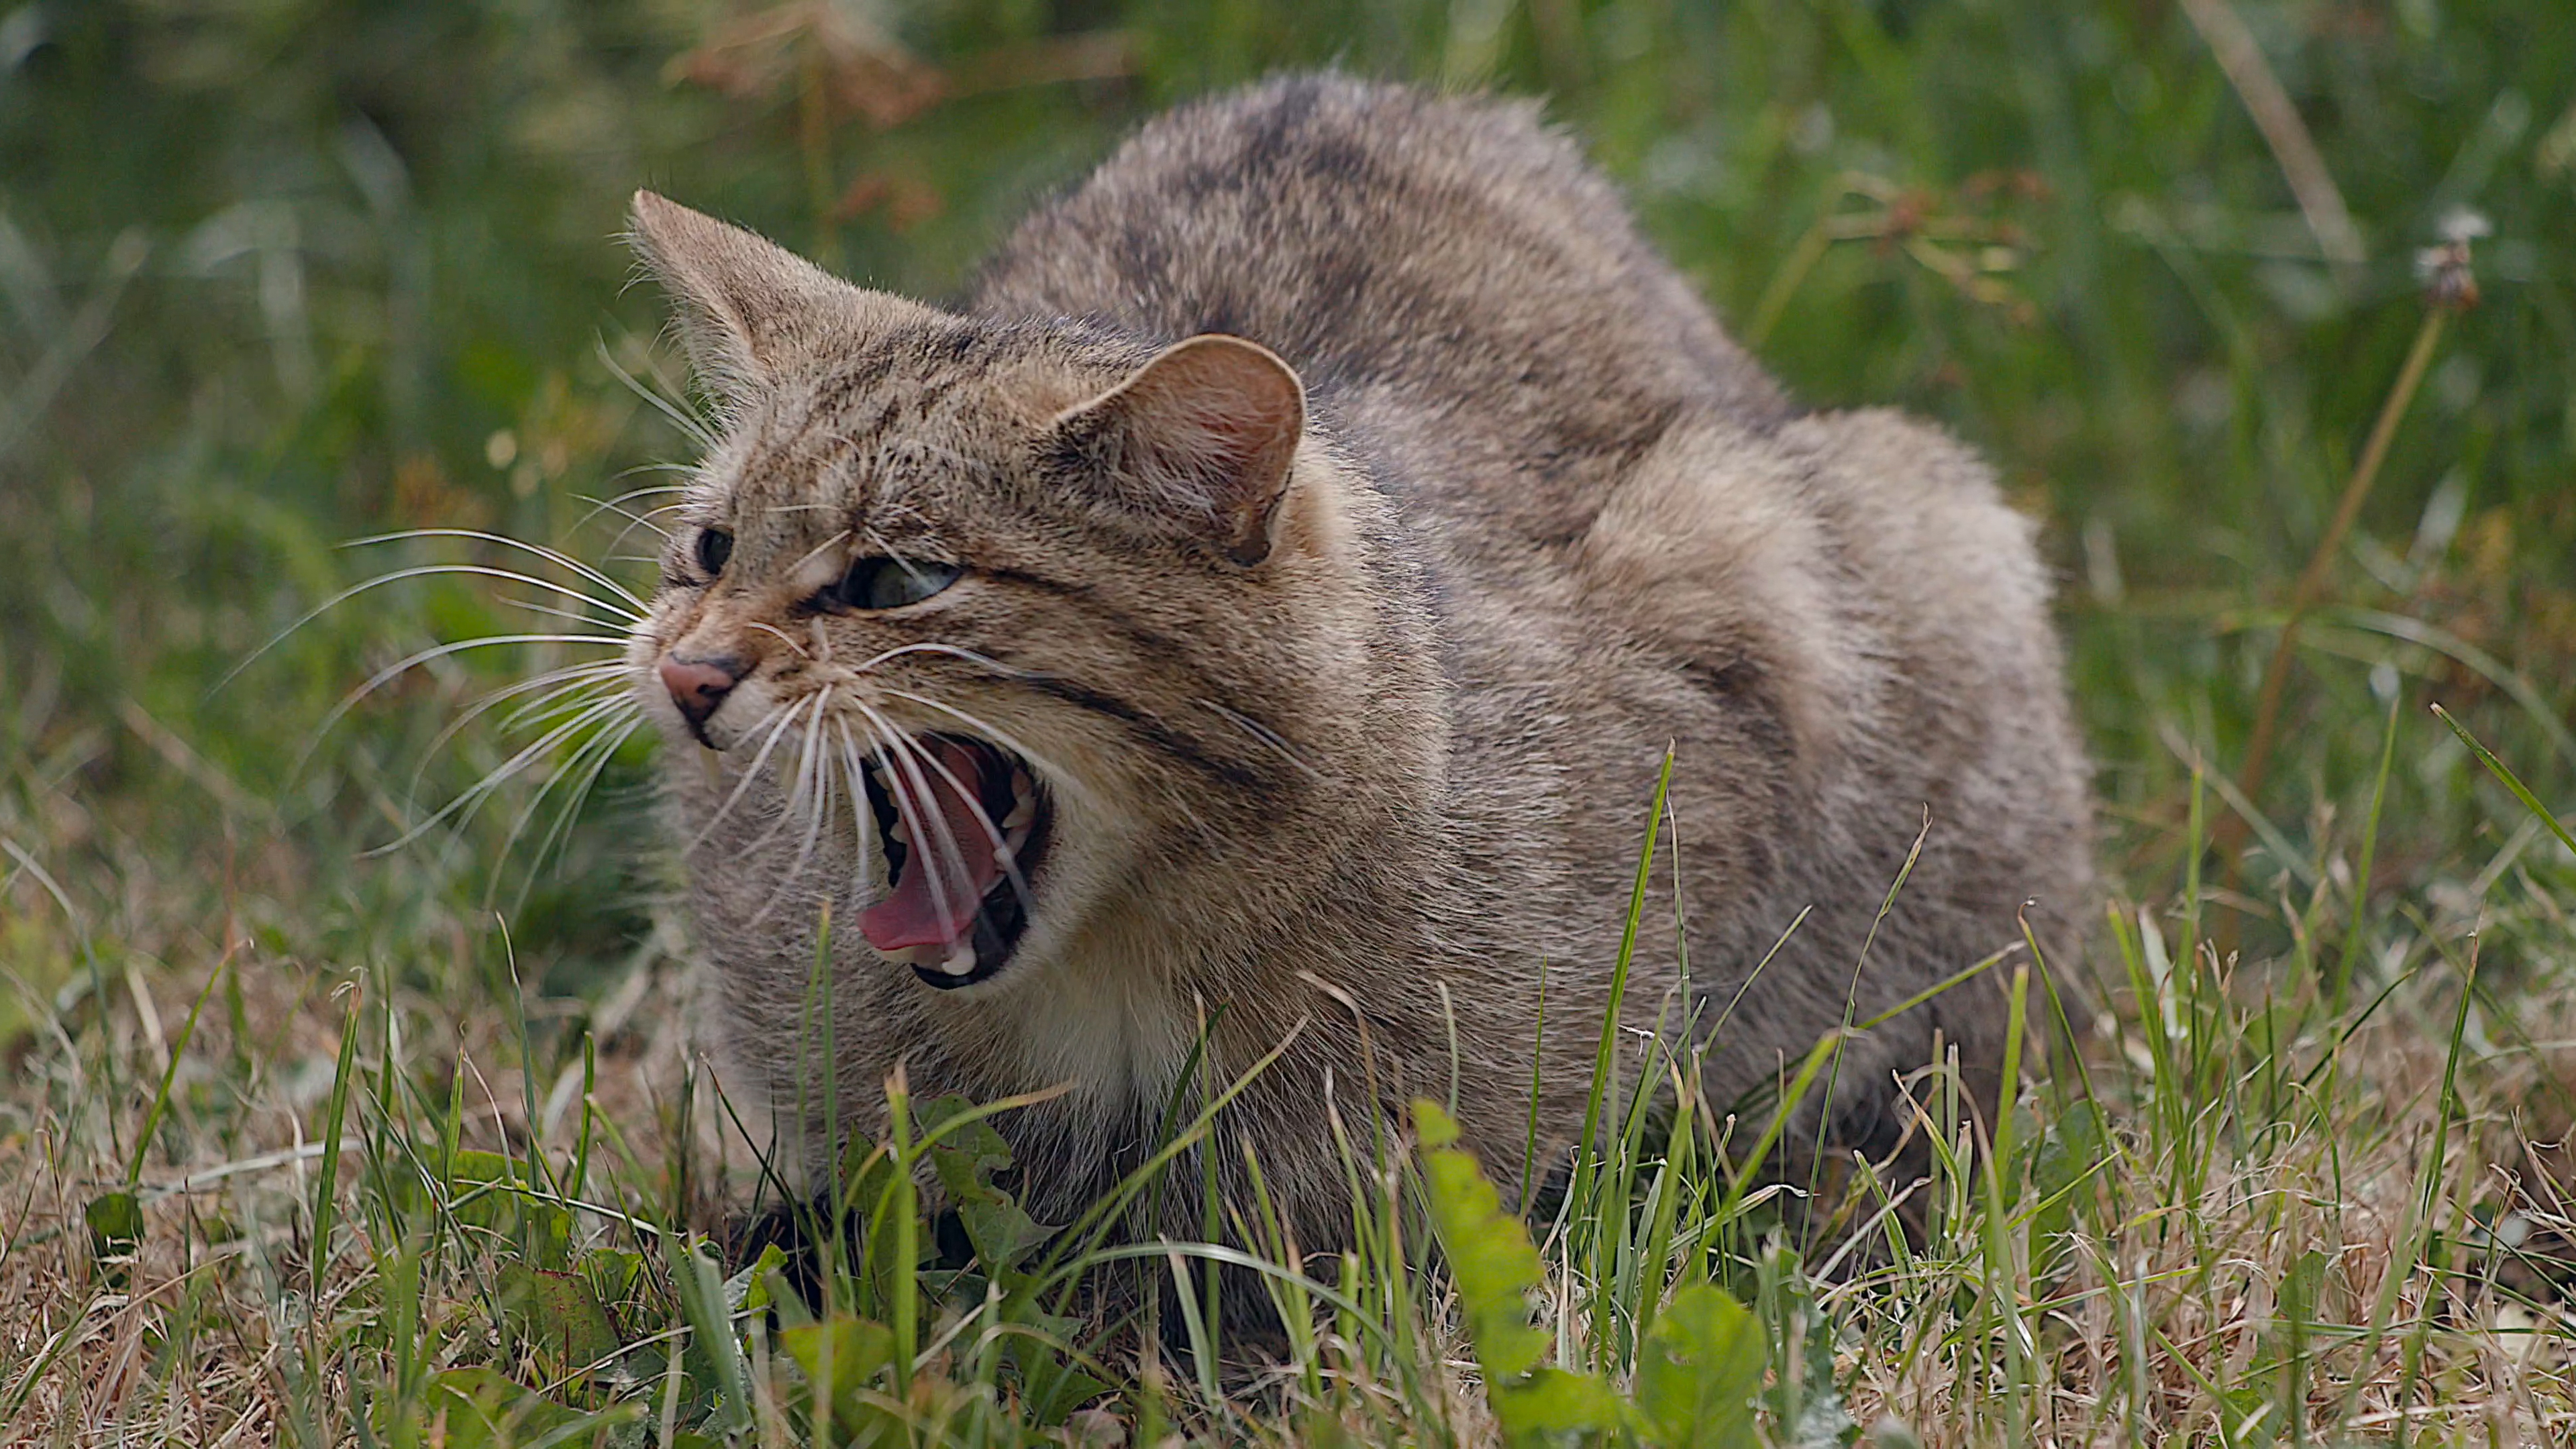 Return Of England S Wildcats Animals To Be Reintroduced After Being Declared Extinct In 19th Century The Independent The Independent